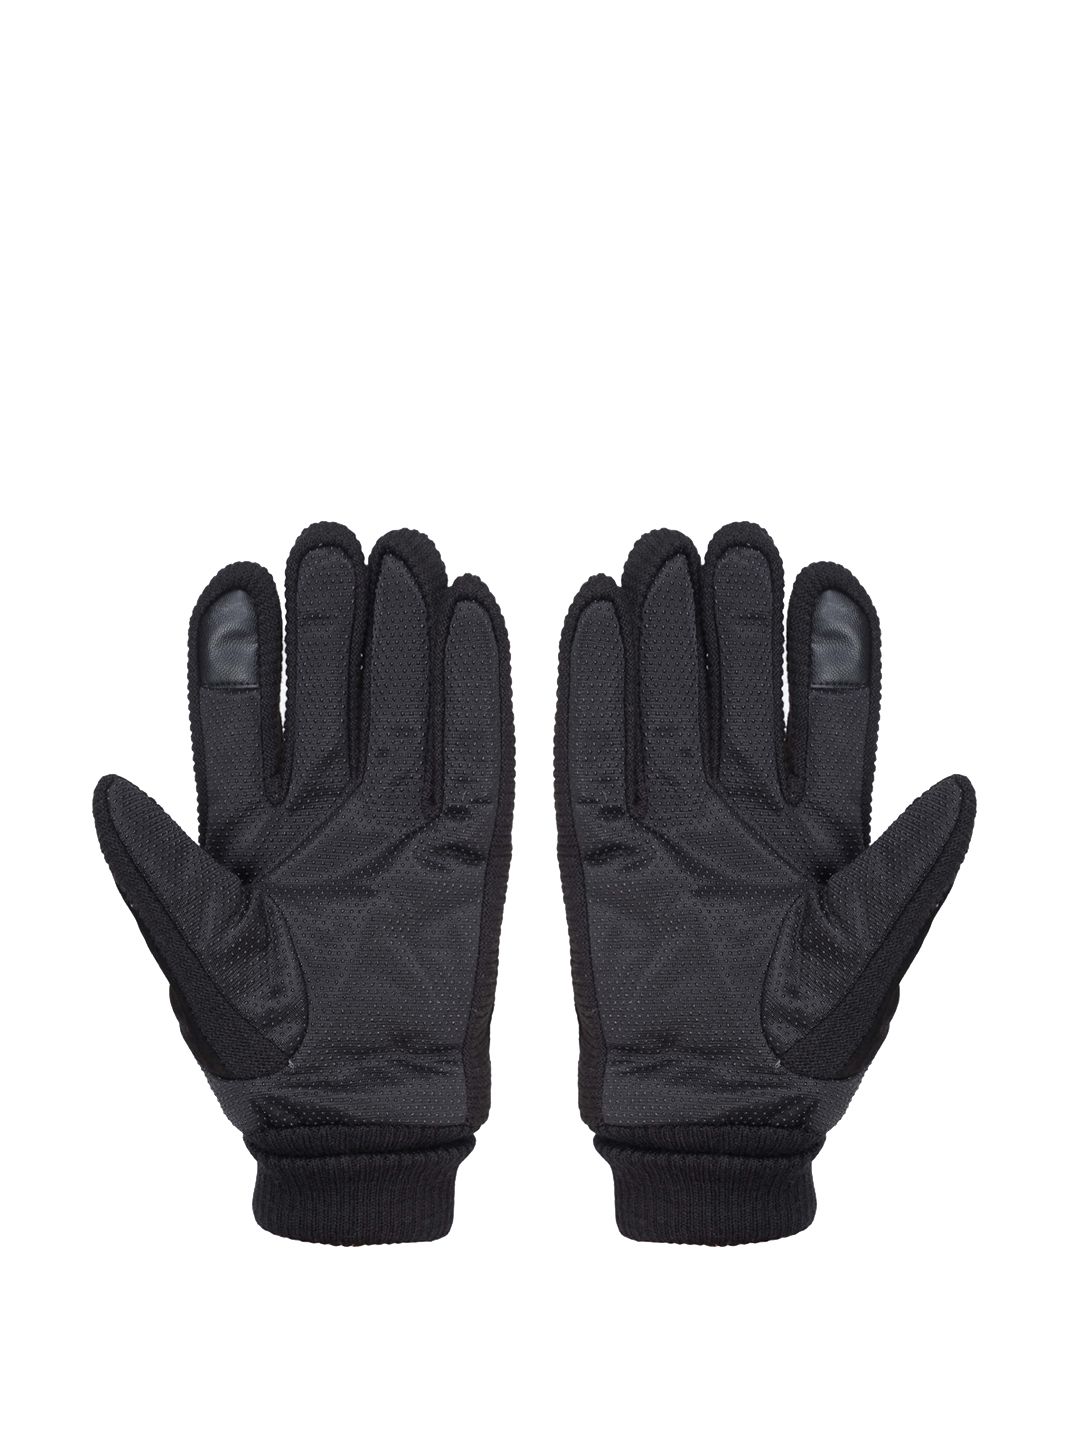 FabSeasons Unisex Black Solid Acrylic Winter Gloves With Touchscreen Fingers Price in India